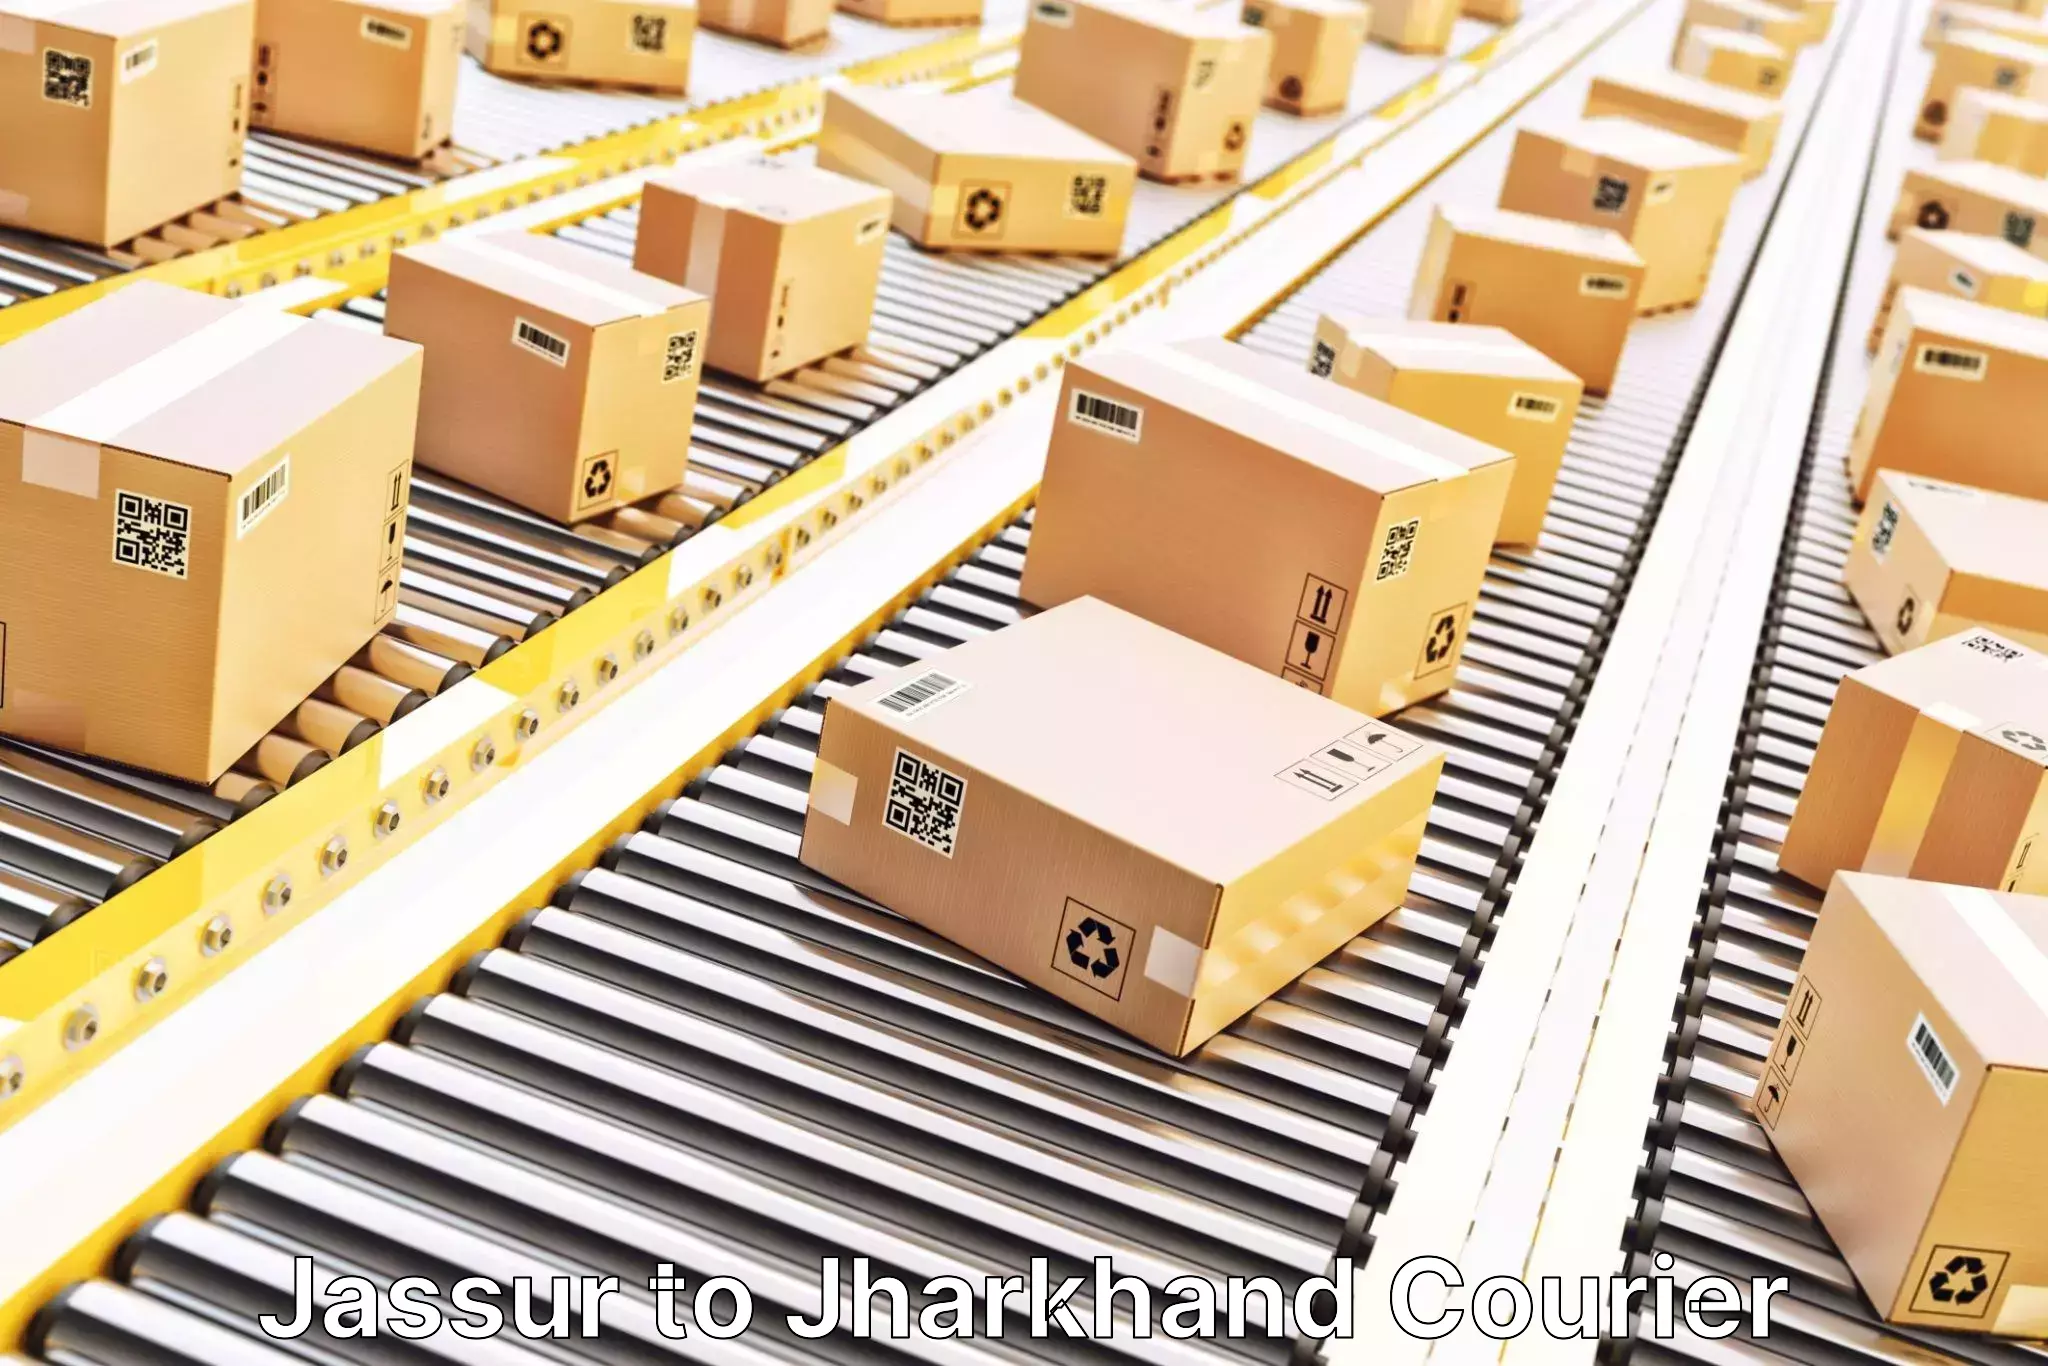 Supply chain delivery Jassur to Jharkhand